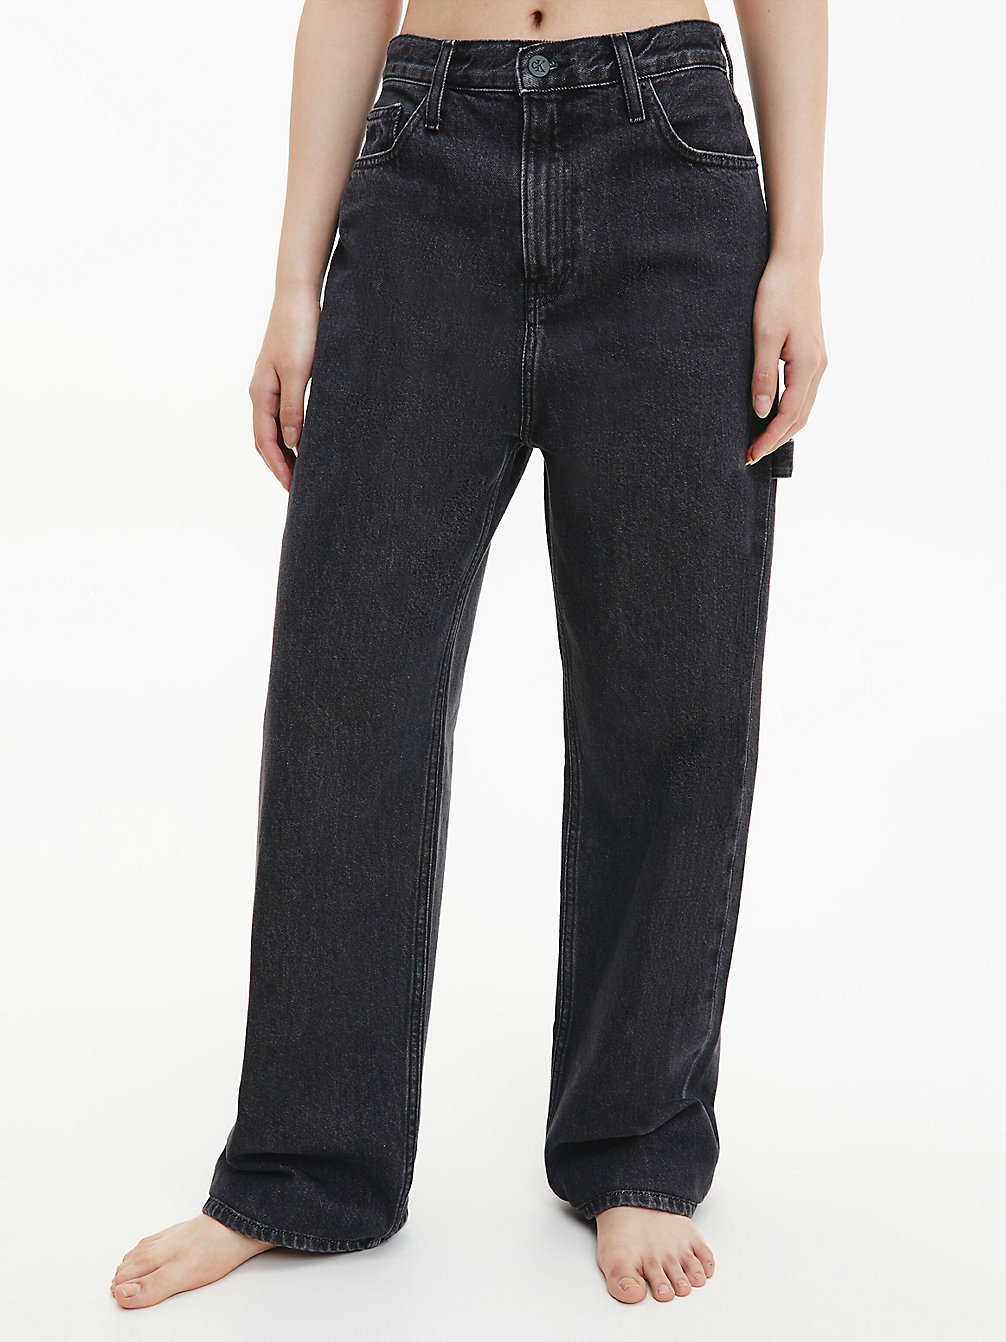 CK BLACK High Rise Relaxed Utility Jeans undefined donna Calvin Klein